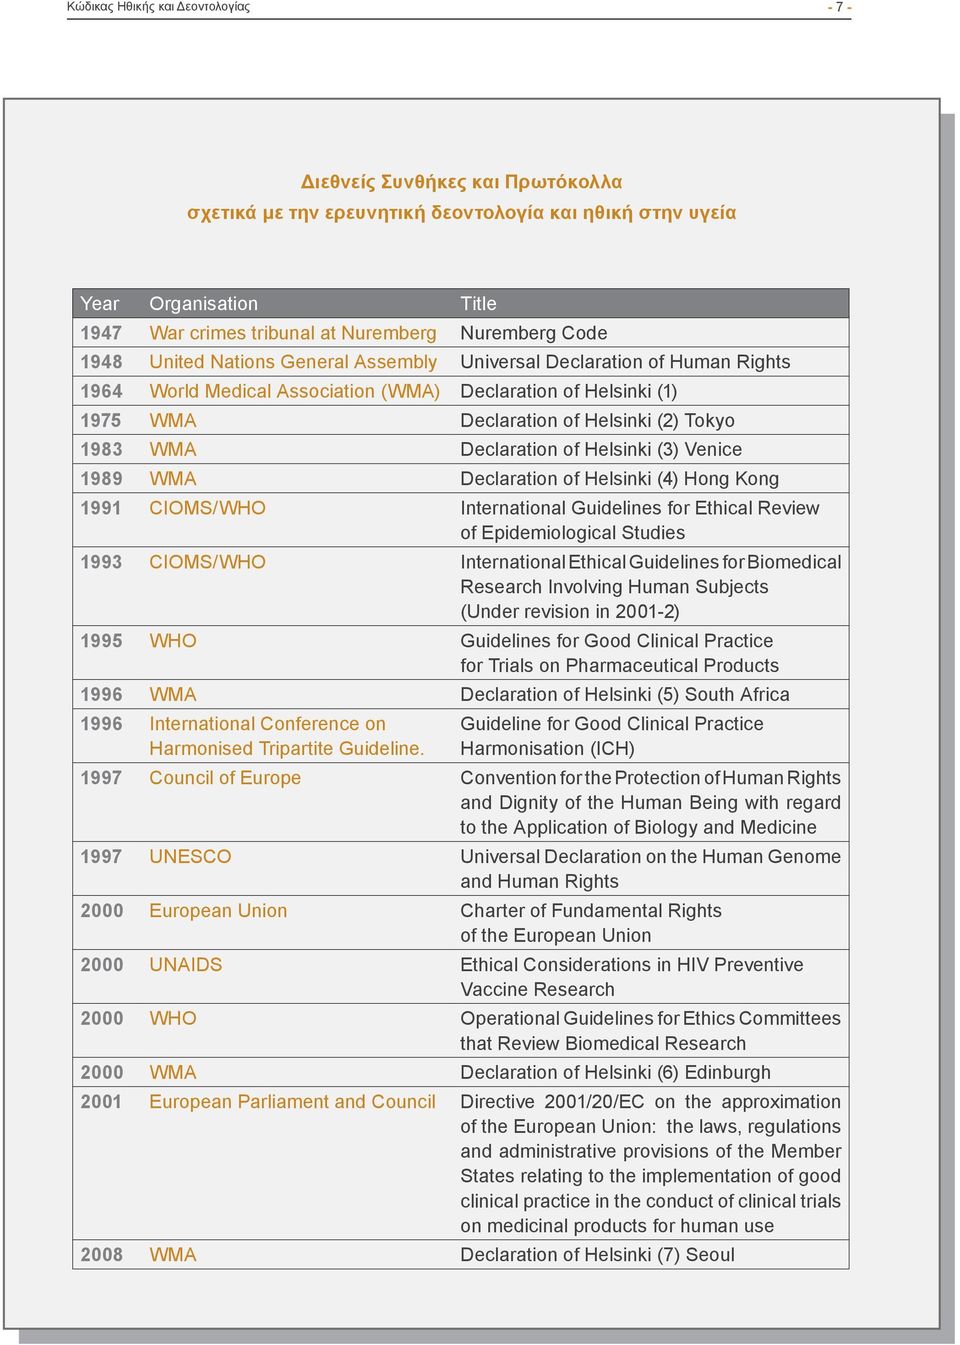 1983 WMA Declaration of Helsinki (3) Venice 1989 WMA Declaration of Helsinki (4) Hong Kong 1991 CIOMS/WHO International Guidelines for Ethical Review of Epidemiological Studies 1993 CIOMS/WHO